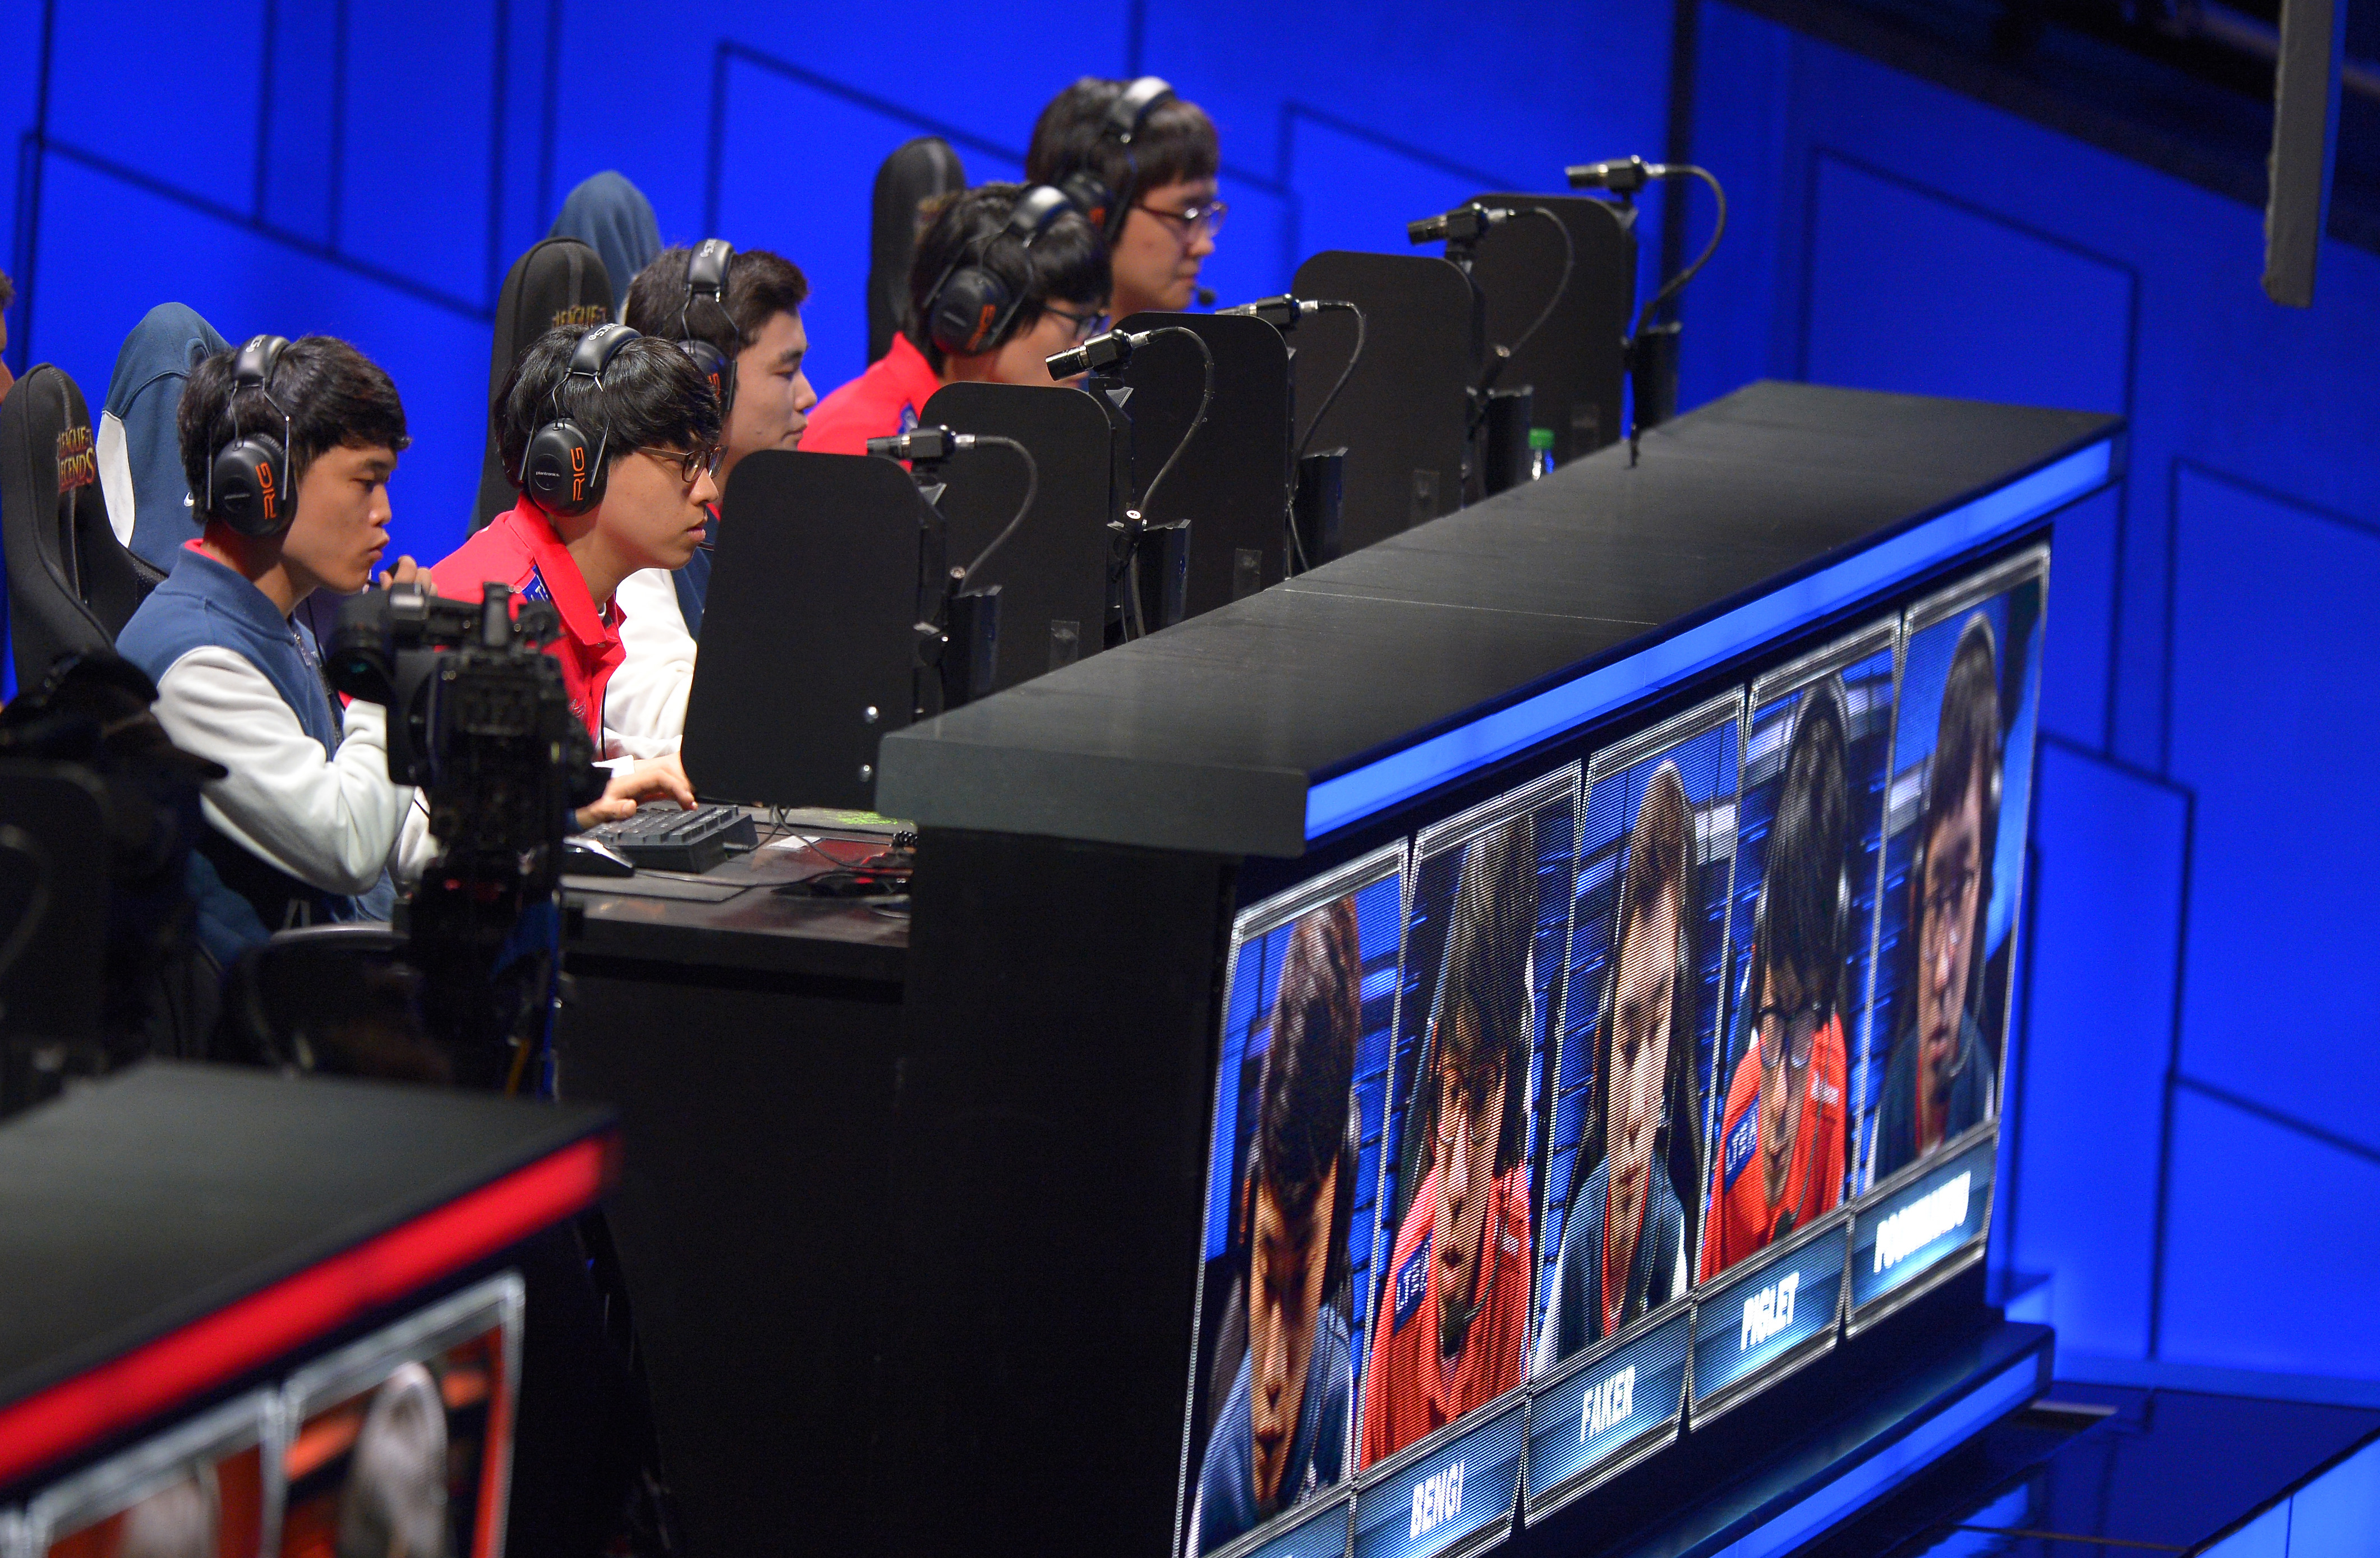 The team of SK Telecom T1 competes in the second round at the League of Legends Season 3 World Championship Final on Oct. 4, 2013, in Los Angeles. (Mark J. Terrill—AP)